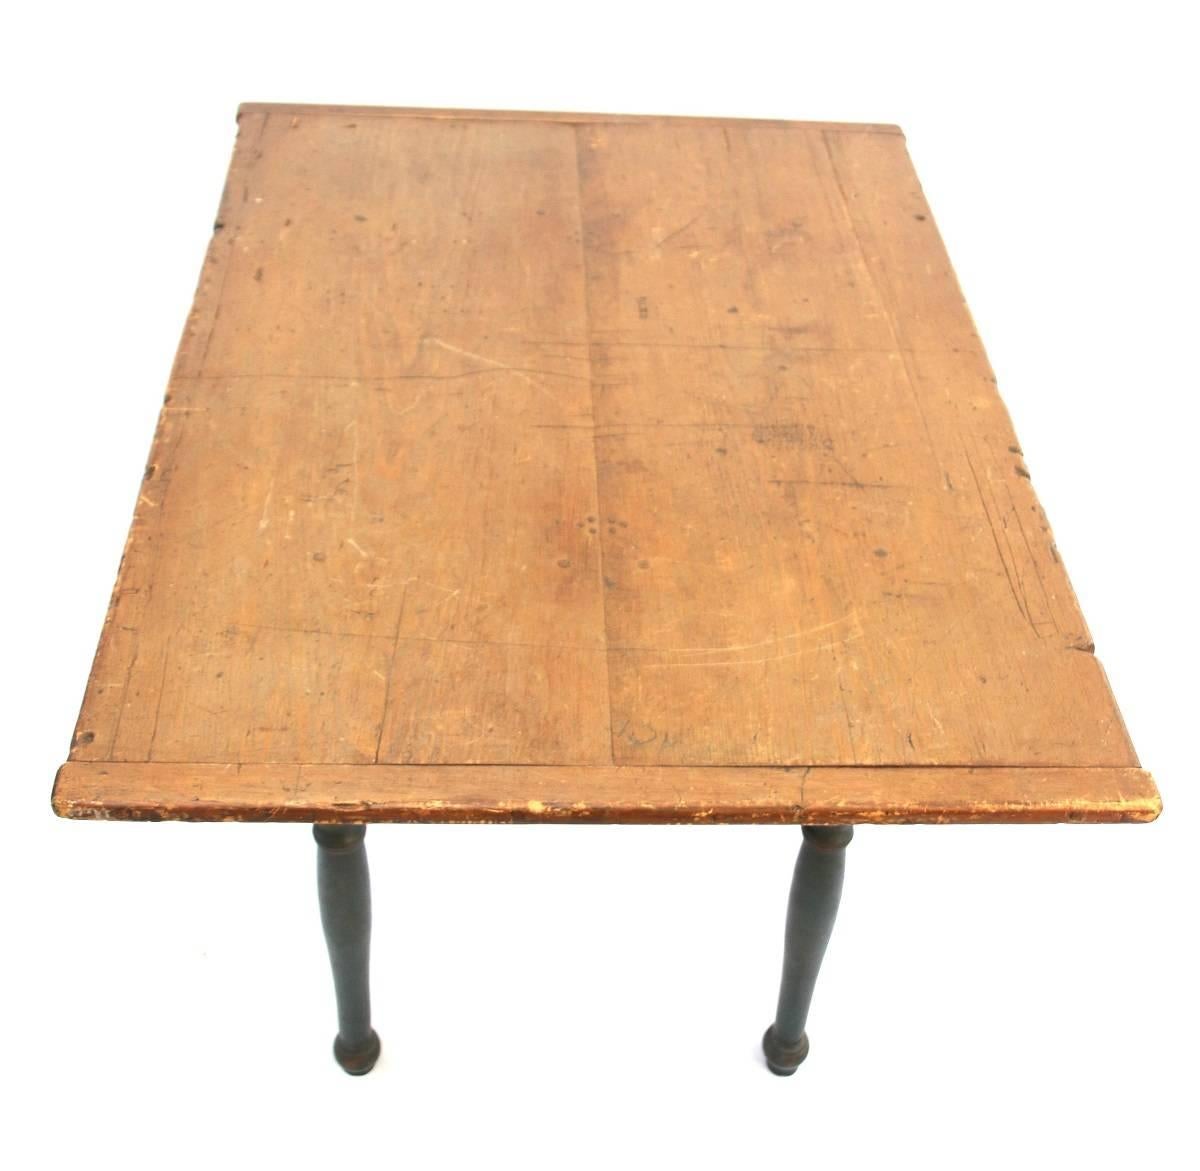 Country Late 18th-Early 19th Century New England Painted Tavern Table For Sale